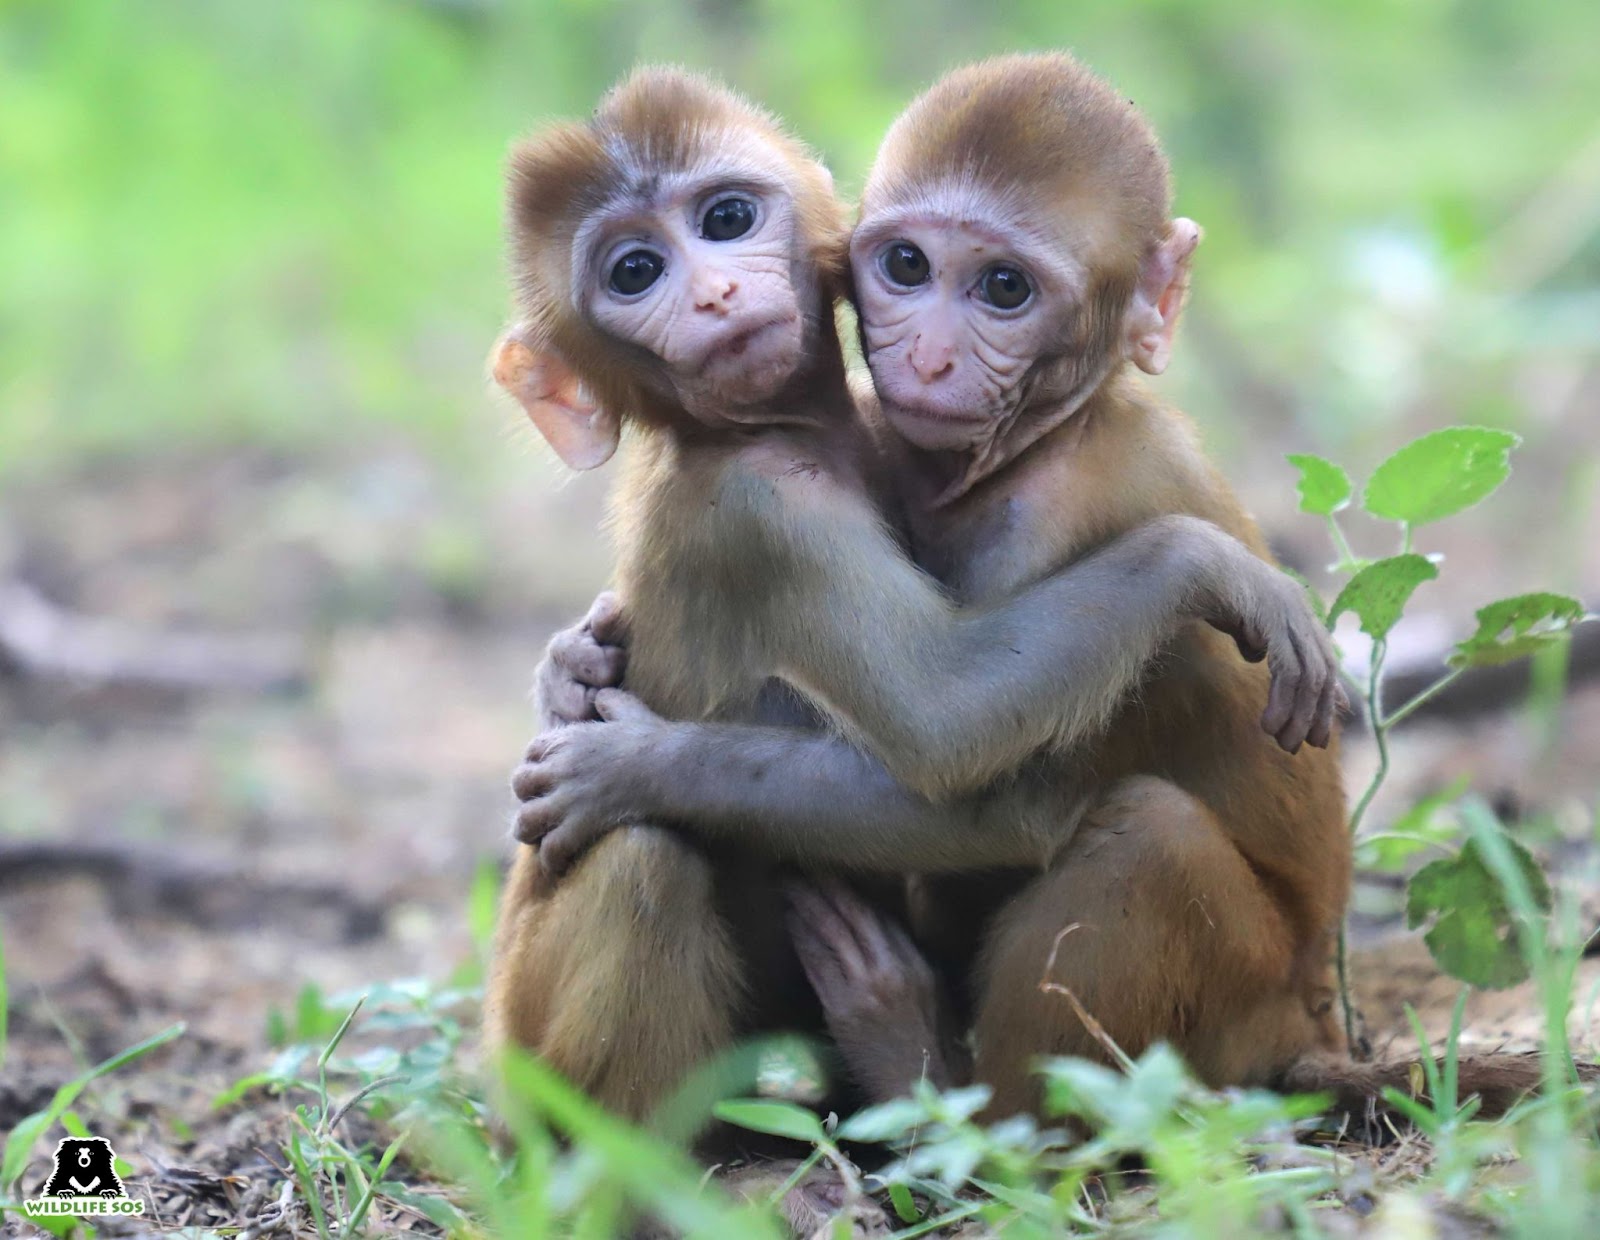 macaques form same-sex relationships